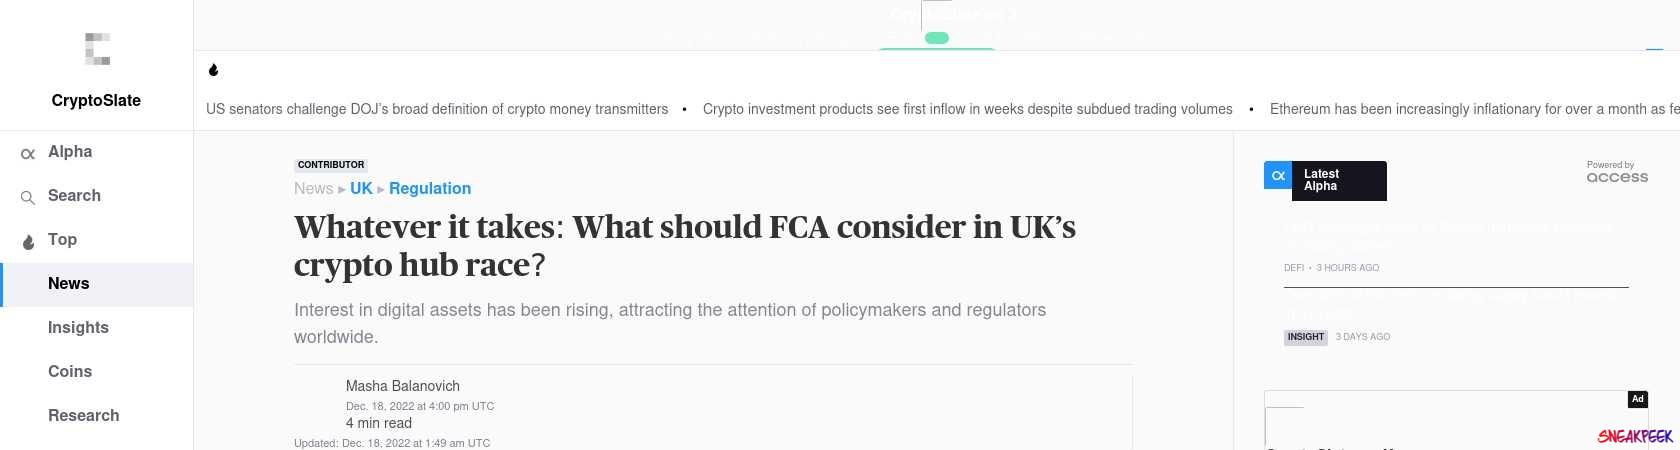 Read the full Article:  ⭲ Whatever it takes: What should FCA consider in UK’s crypto hub race?